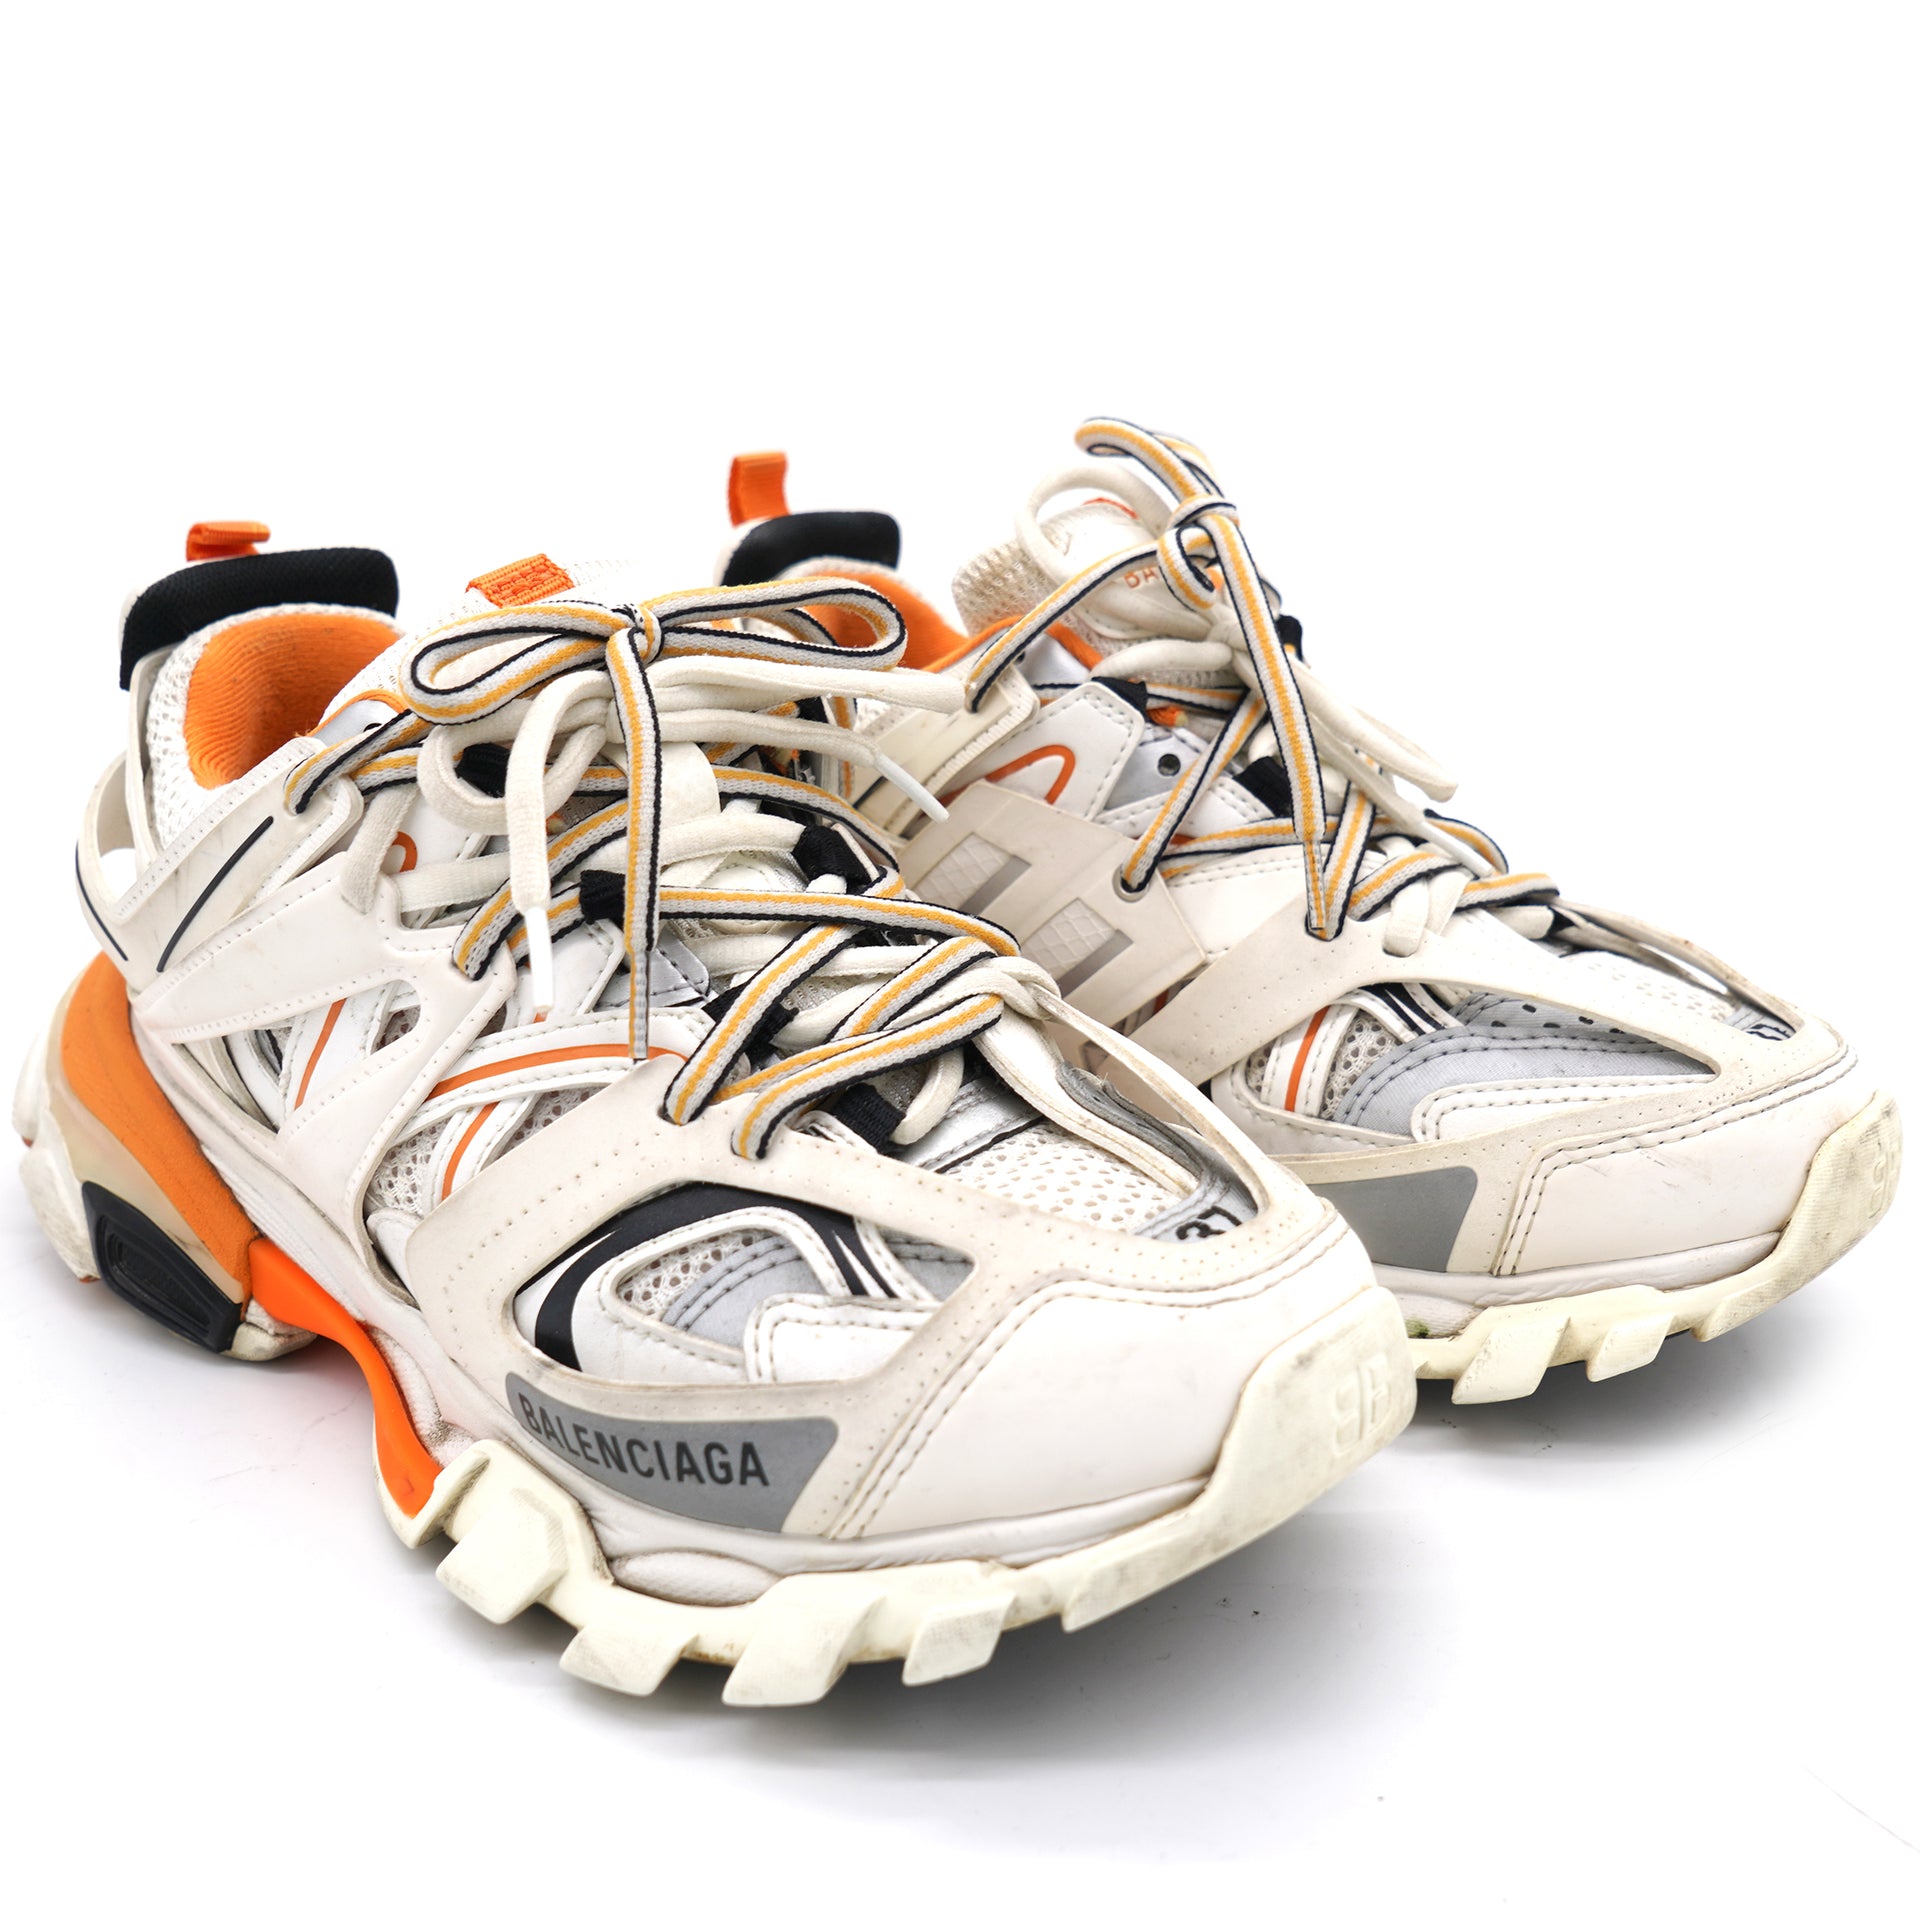 Women's Track Trainers in White and Orange Mesh and Nylon 37